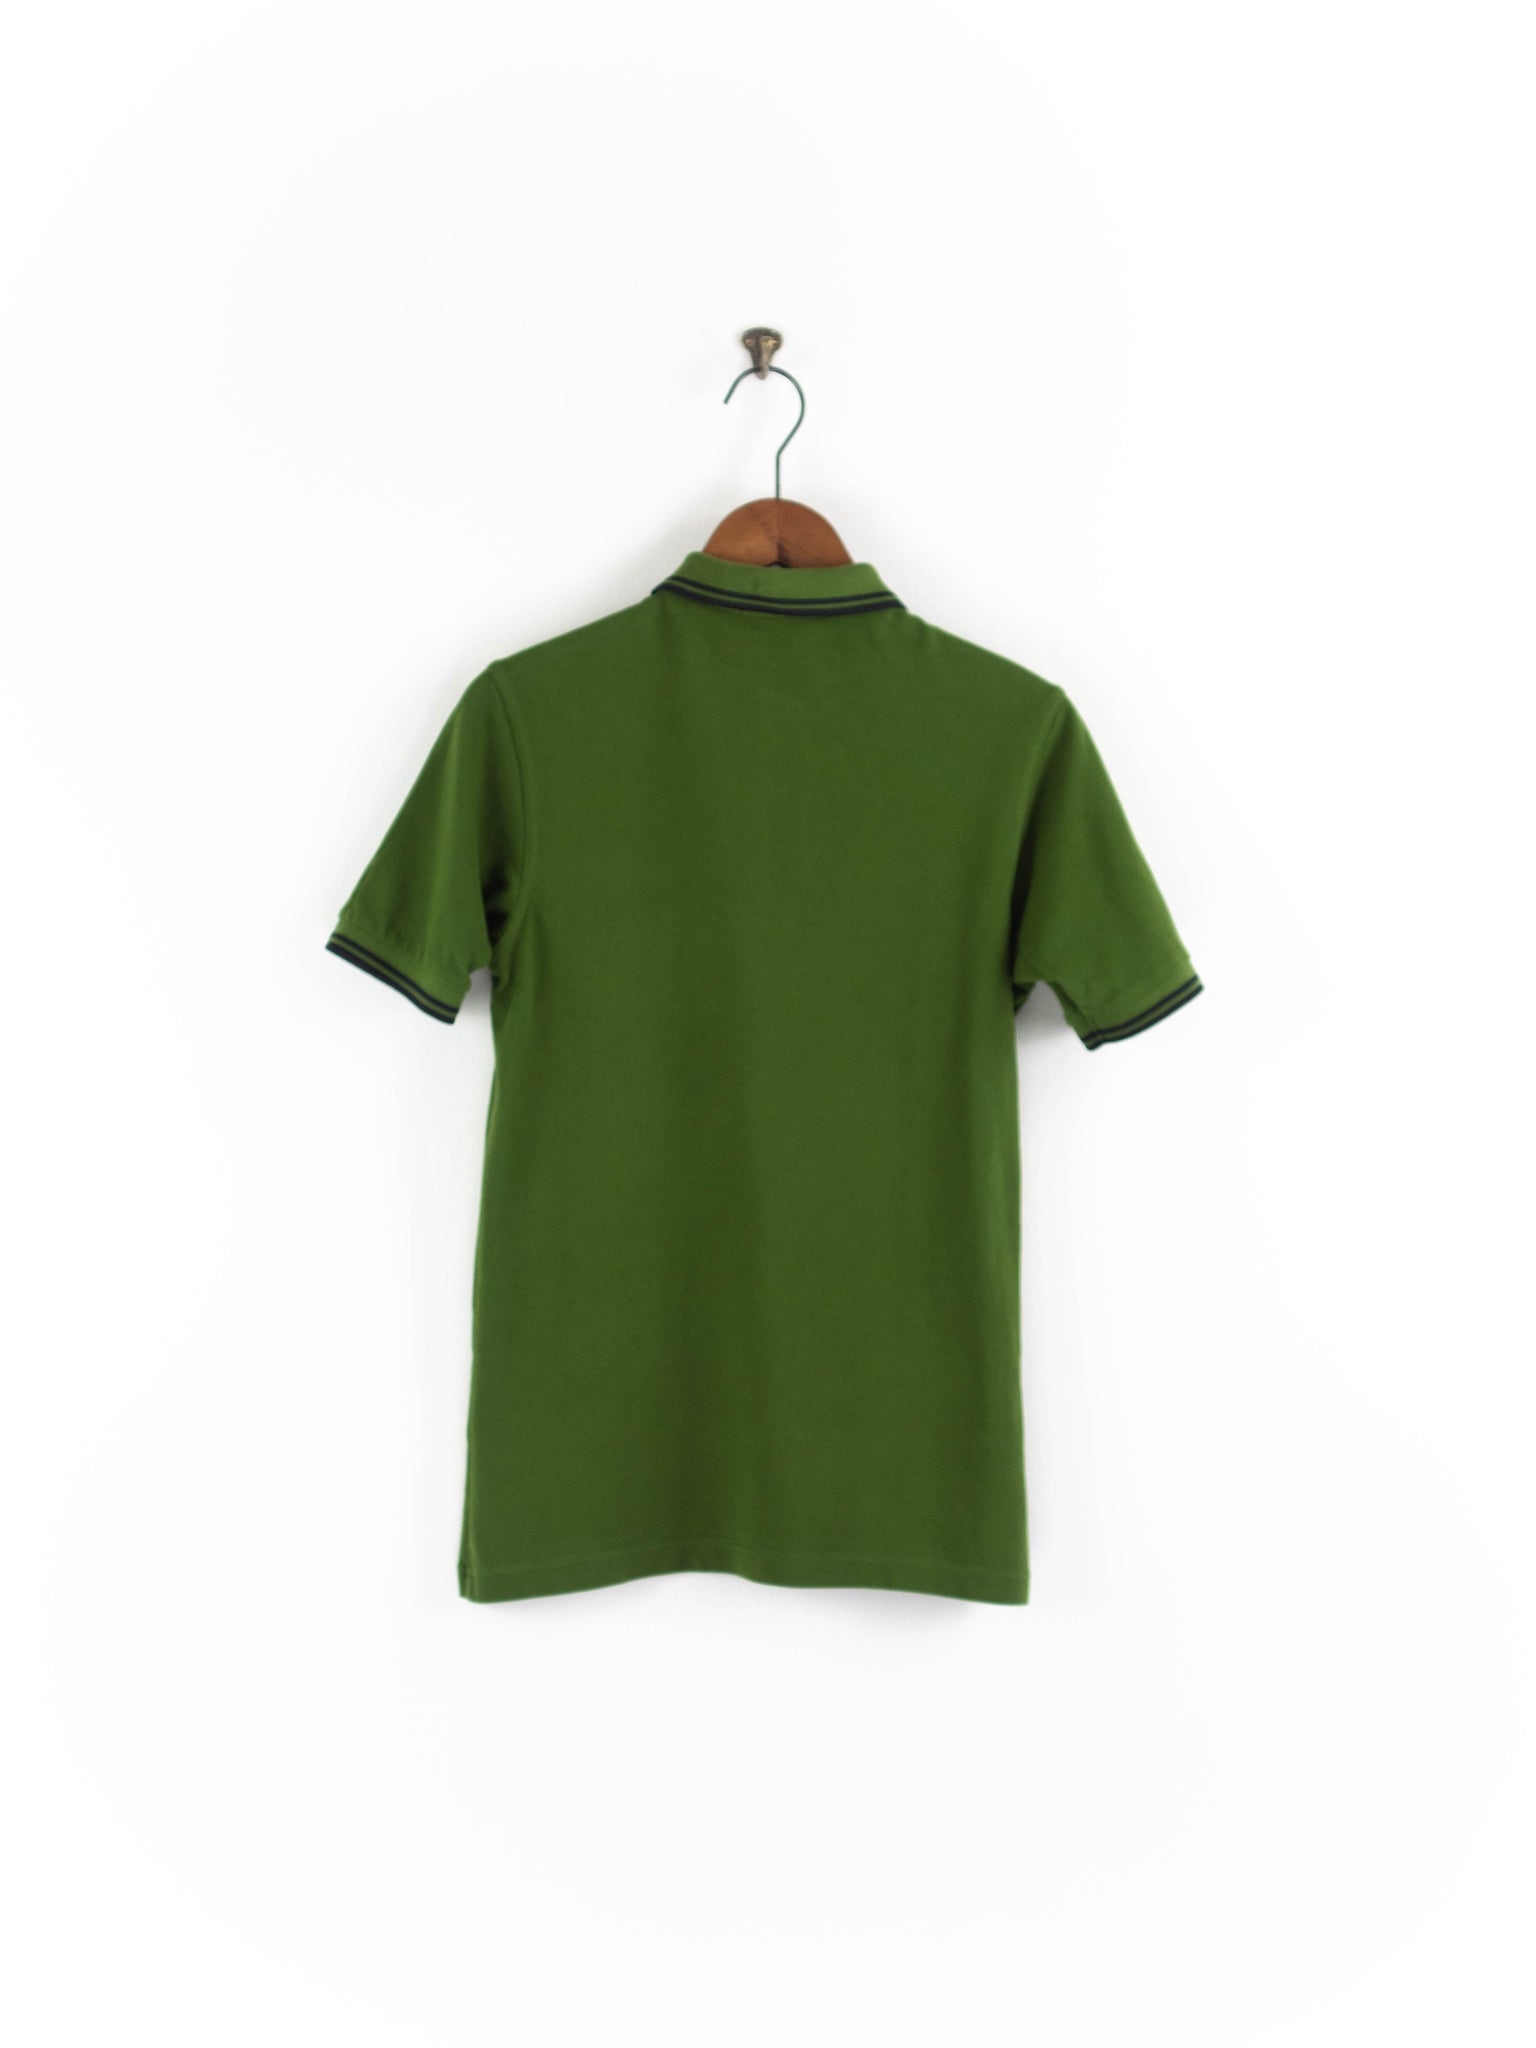 Fred Perry Polo Shirt S